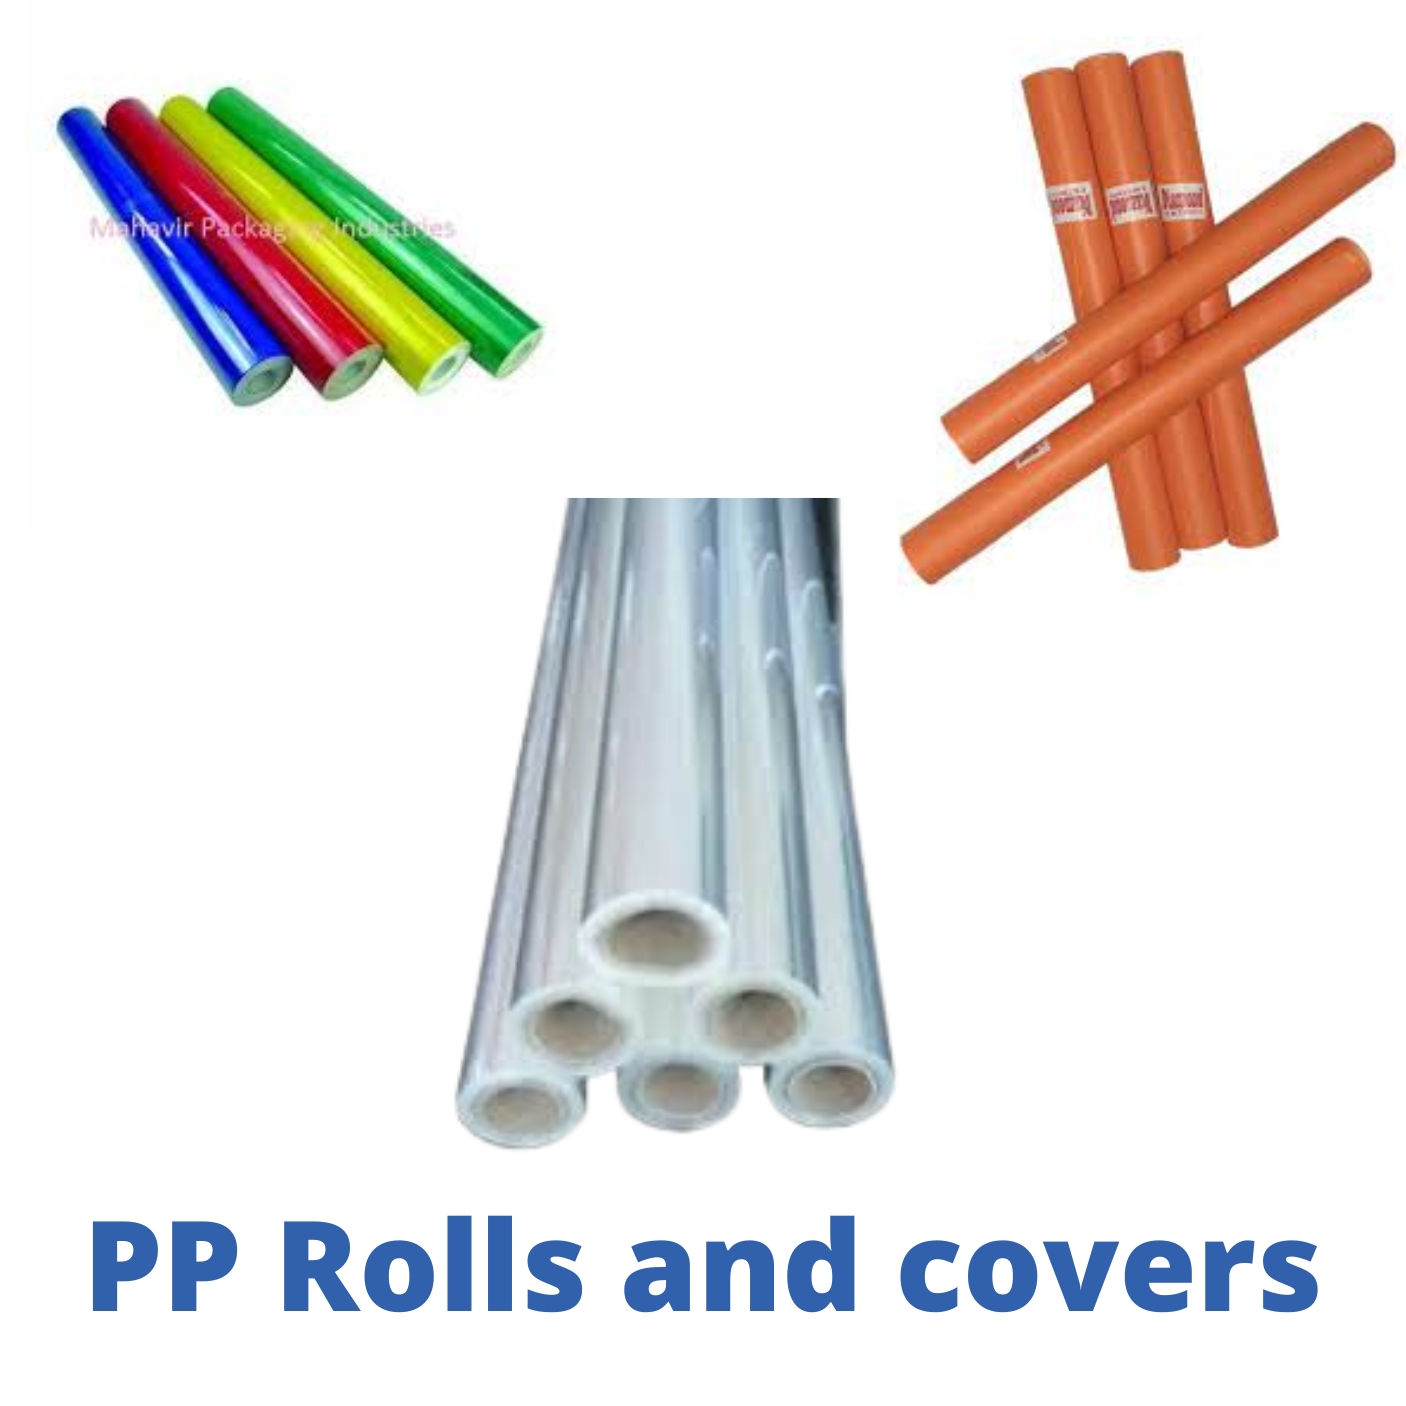 PP Rolls and covers